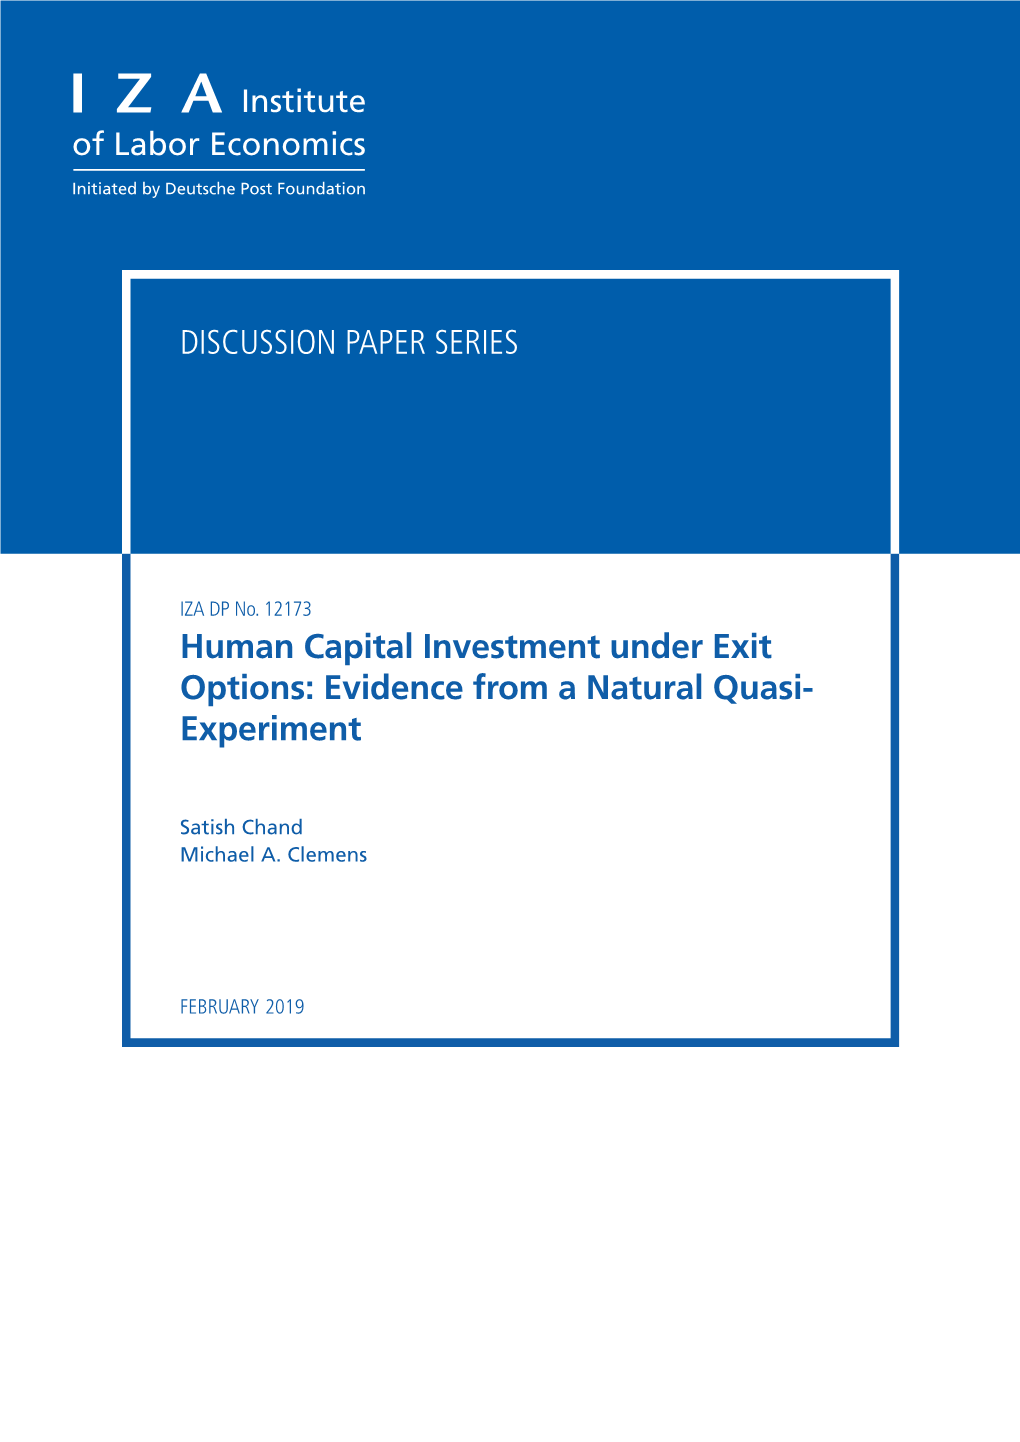 Human Capital Investment Under Exit Options: Evidence from a Natural Quasi- Experiment